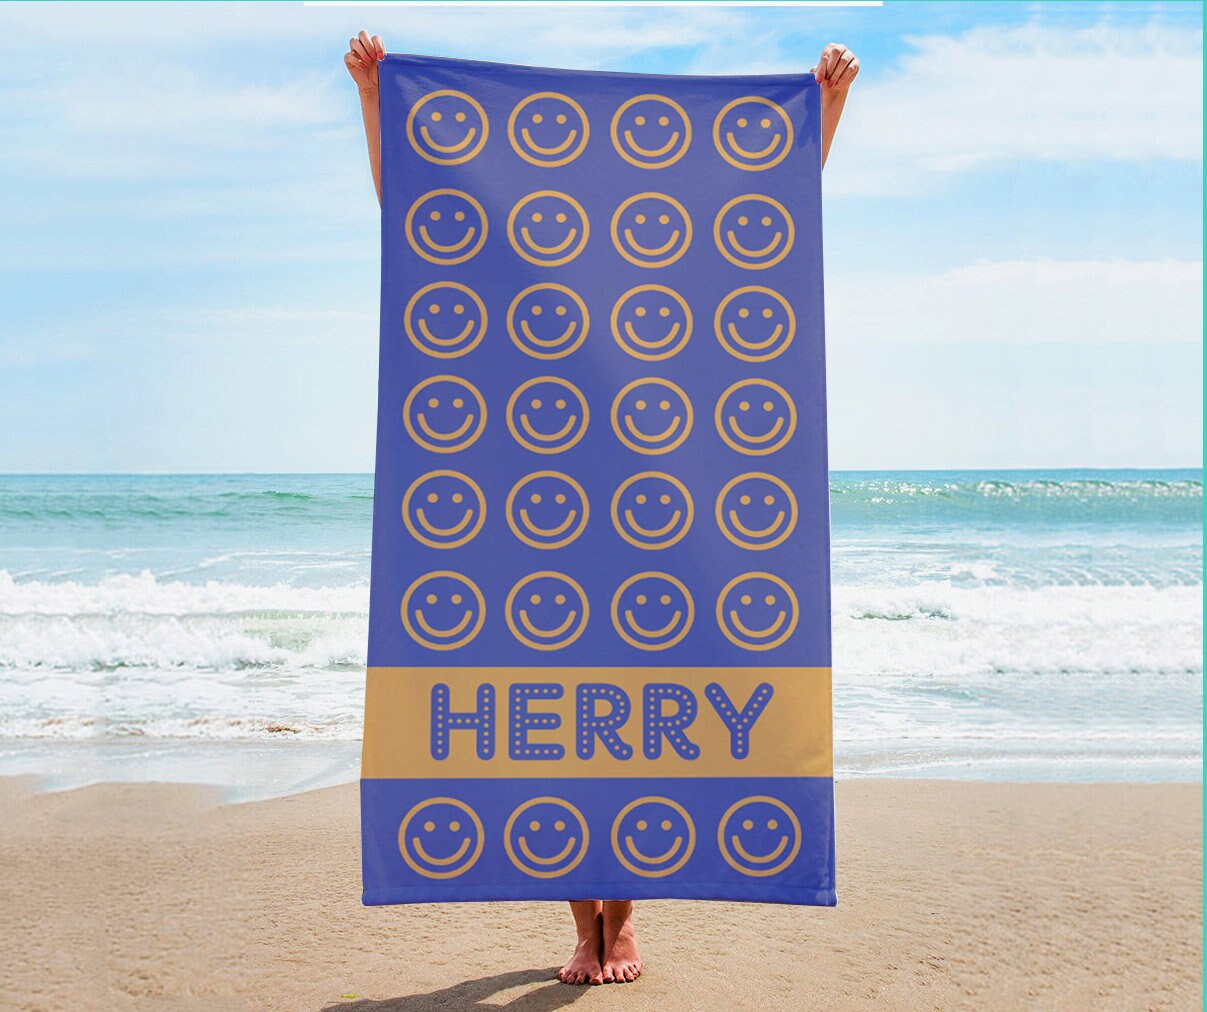 New Happy Smile Personalized Beach Towel Personalized Name Bath Towel Custom Pool Towel Beach Towel With Name Outside Birthday Vacation Gift